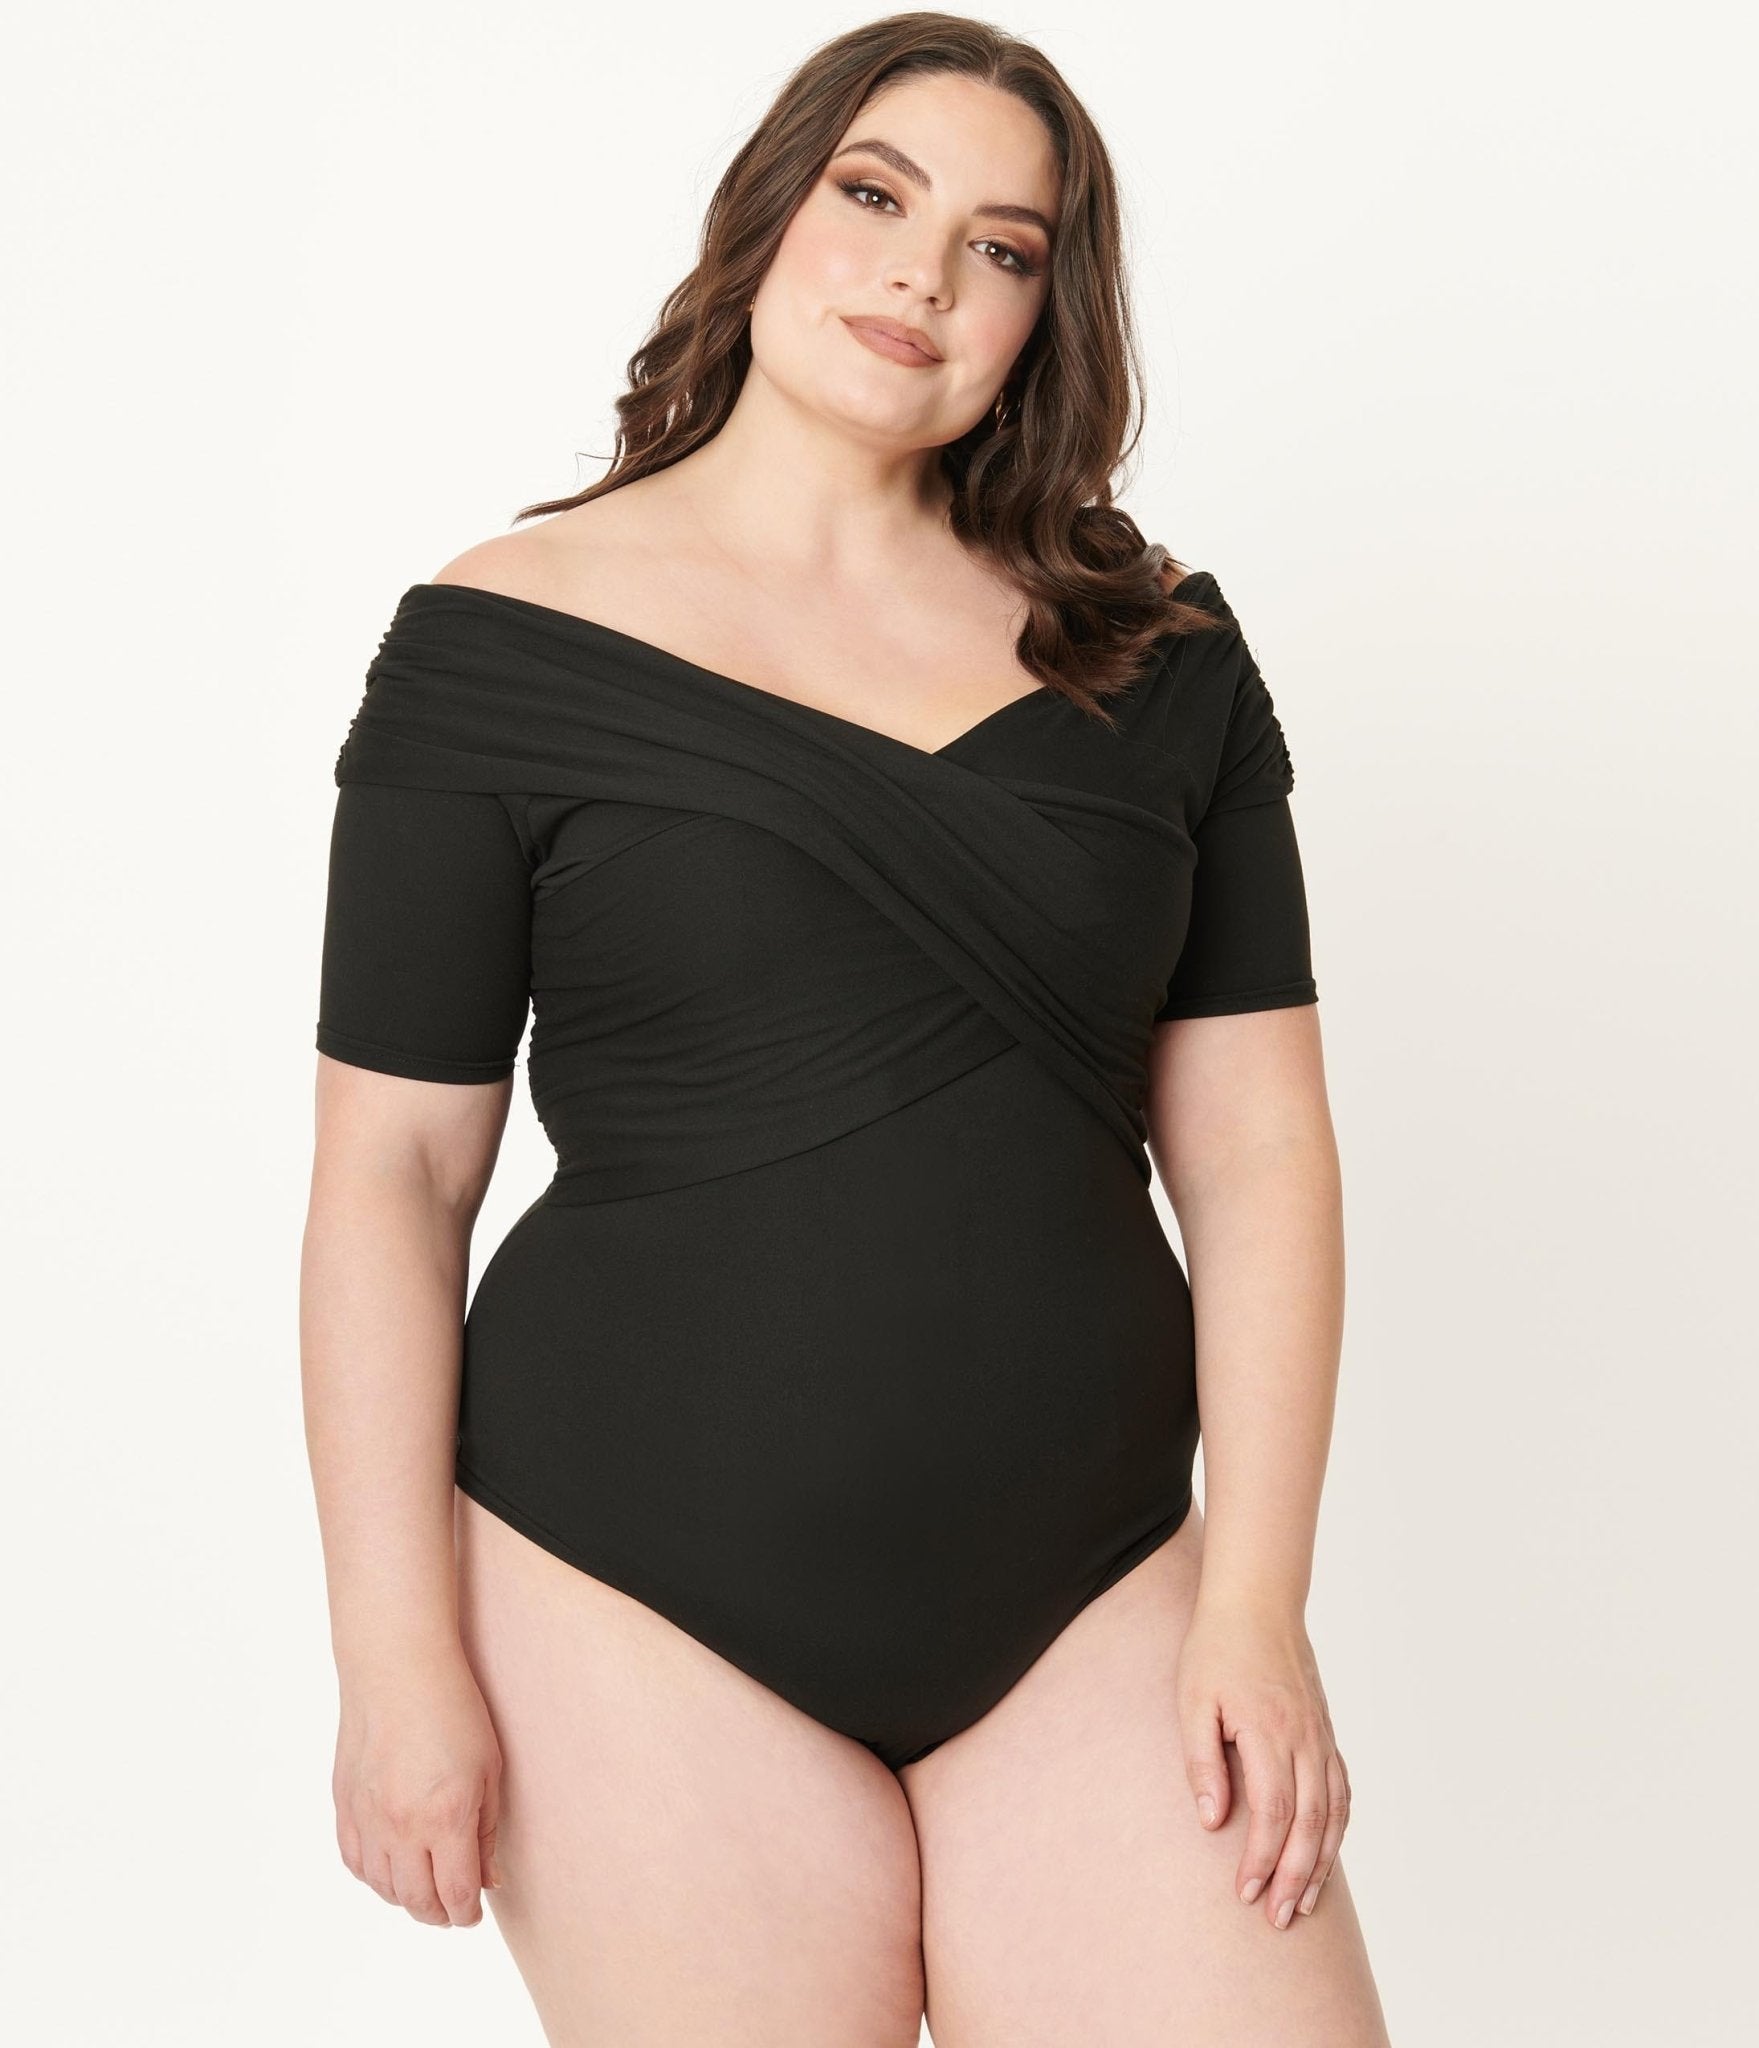 PLUS SIZE BLACK BODY SUIT, Women's Fashion, Tops, Other Tops on Carousell